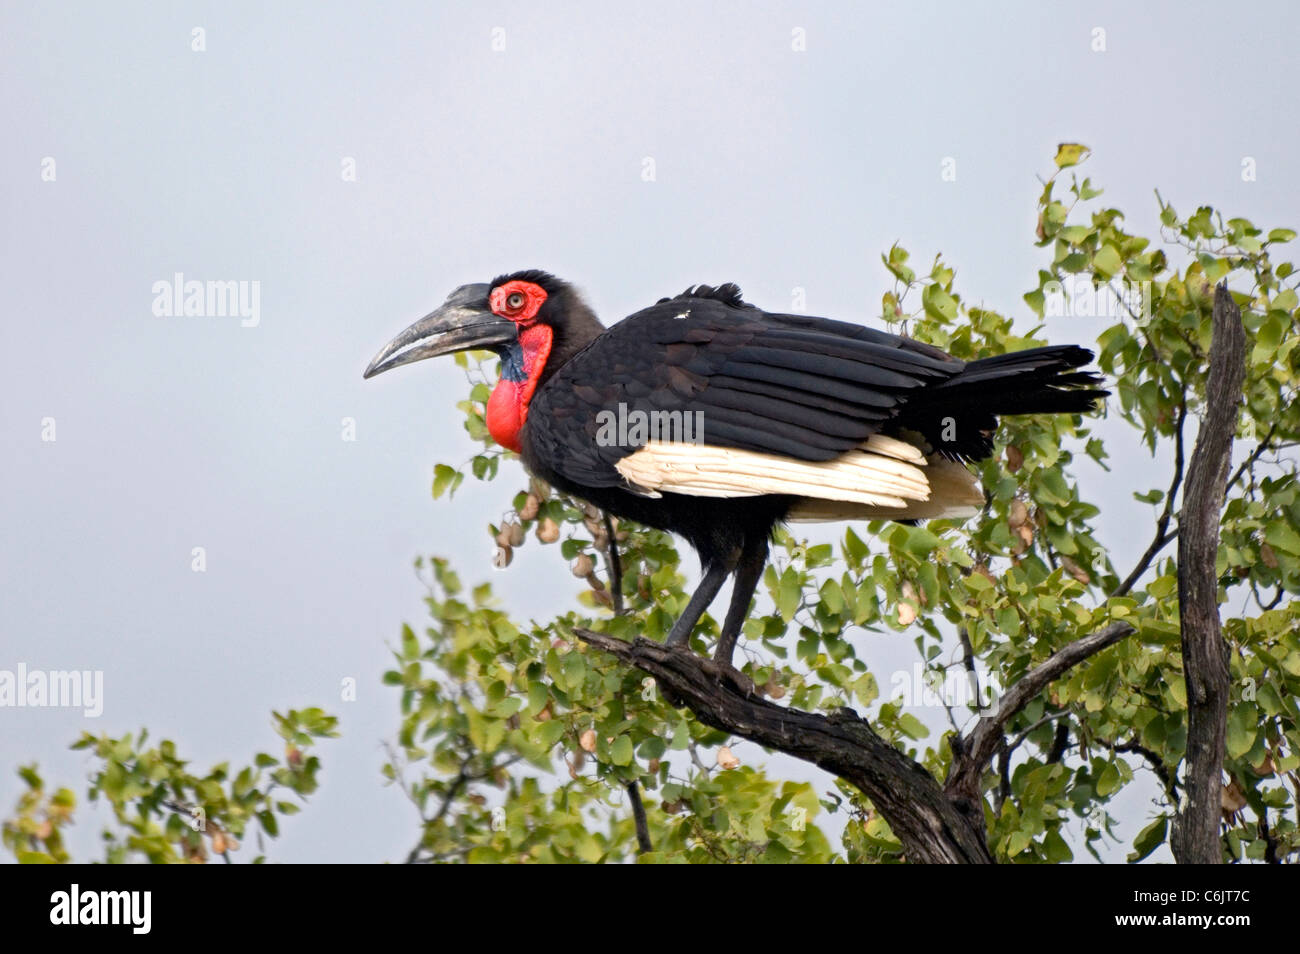 Southern Ground Hornbill perched in tree. Stock Photo